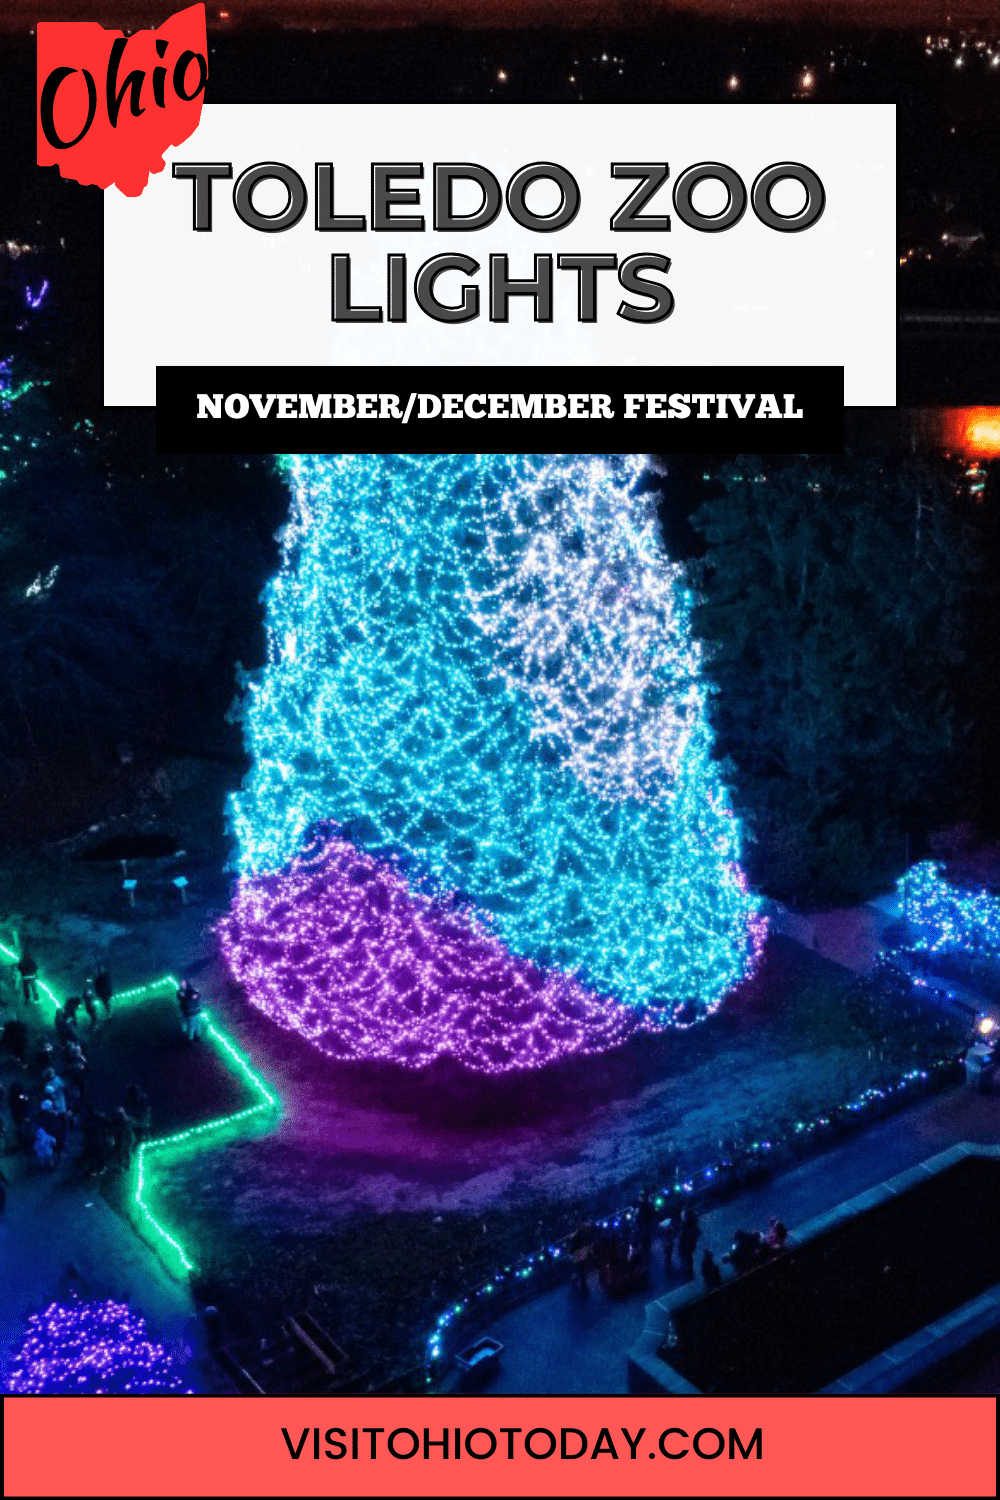 Toledo Zoo Lights Before Christmas is an extravaganza running from November 17 through December 31, with lots of fun for the whole family!